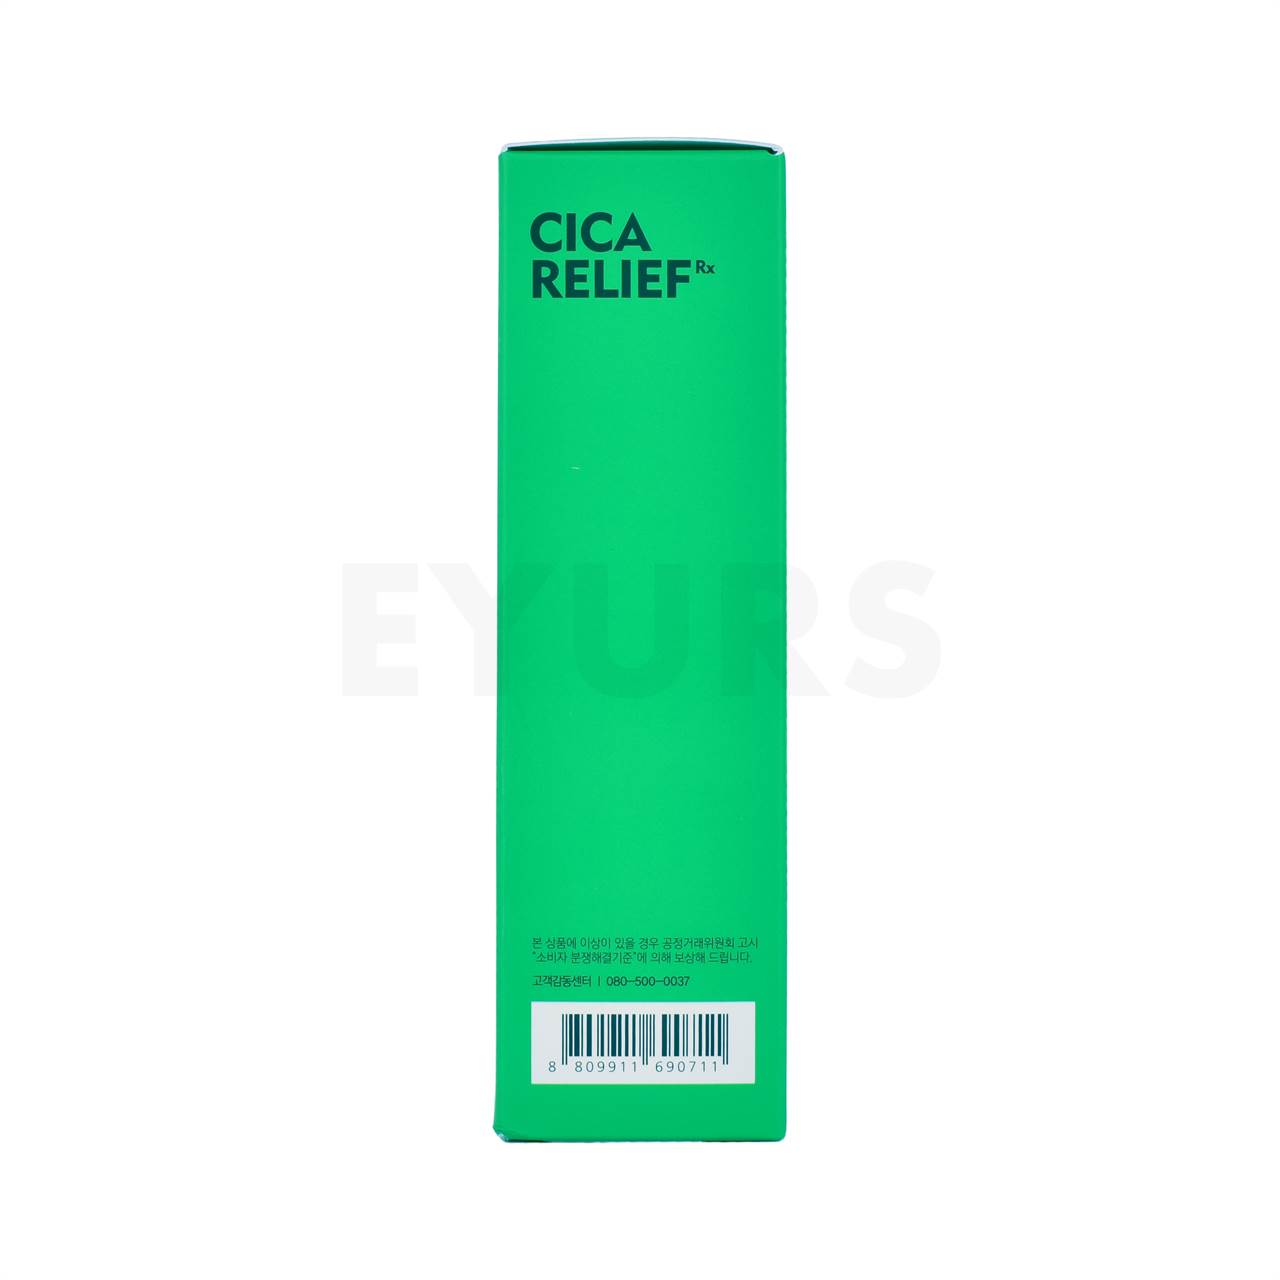 real barrier cica relief rx calming cream 60ml left side packaging